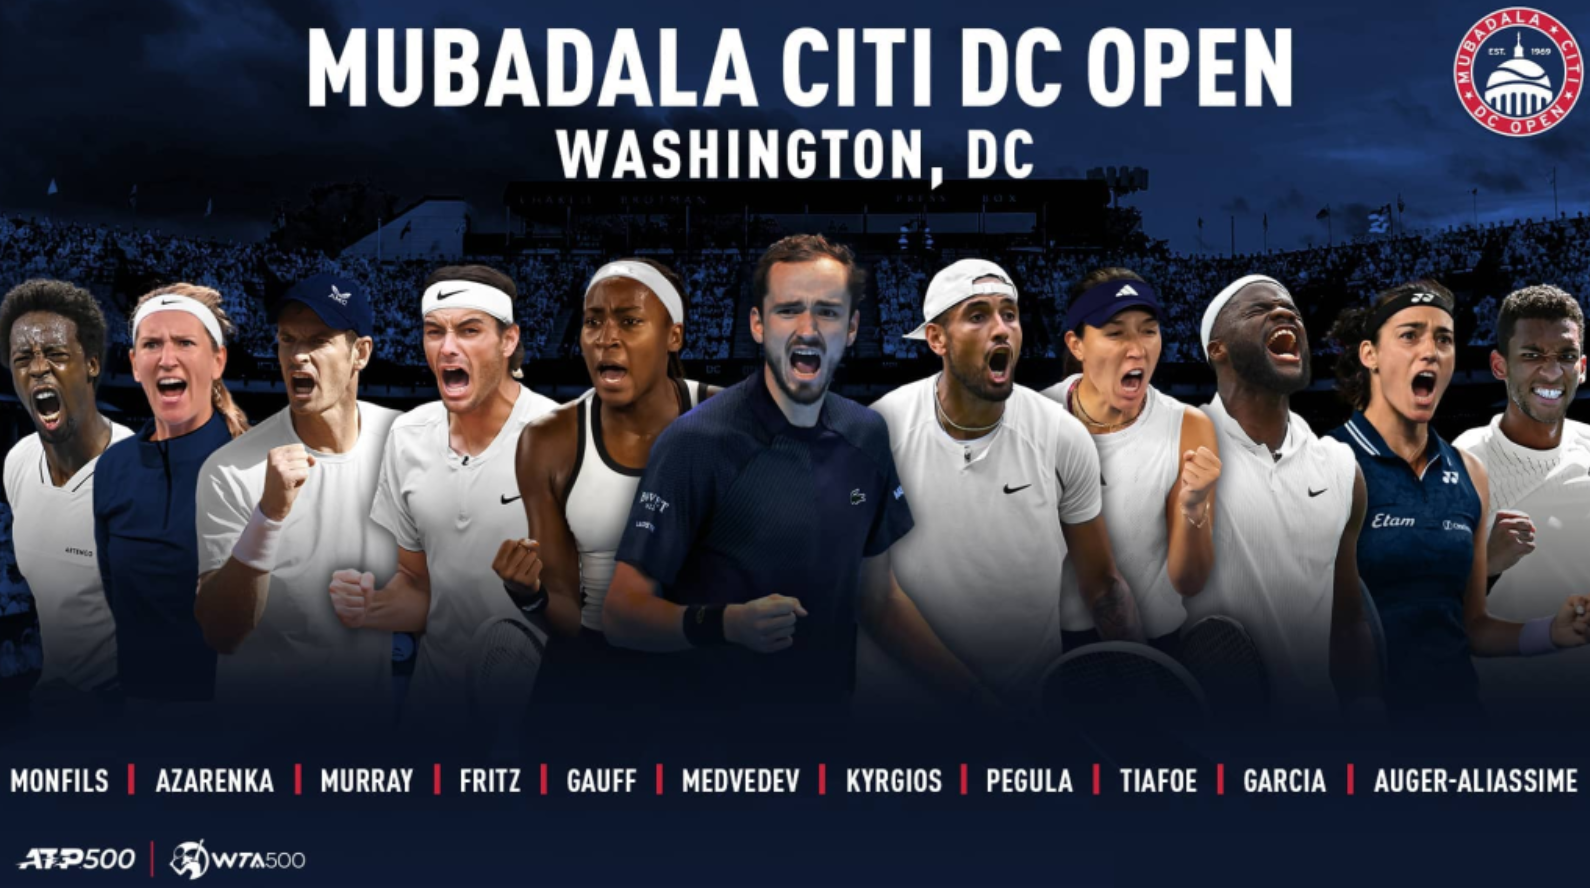 What is the Washington Open?